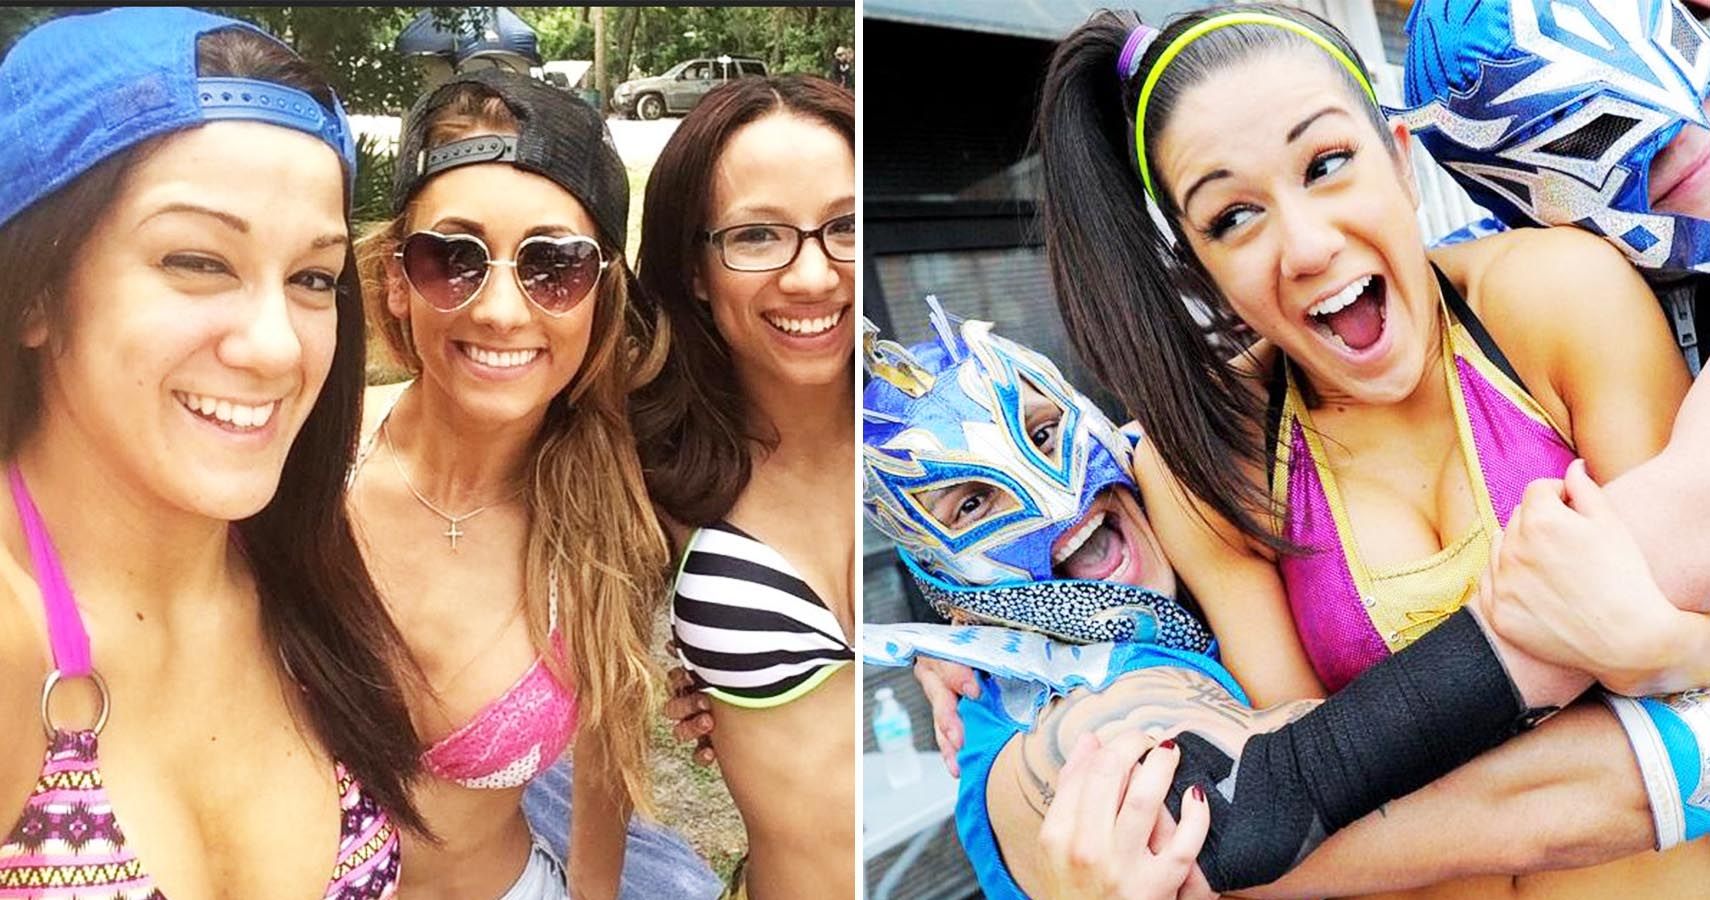 ashleigh snow recommends bayley in a bikini pic